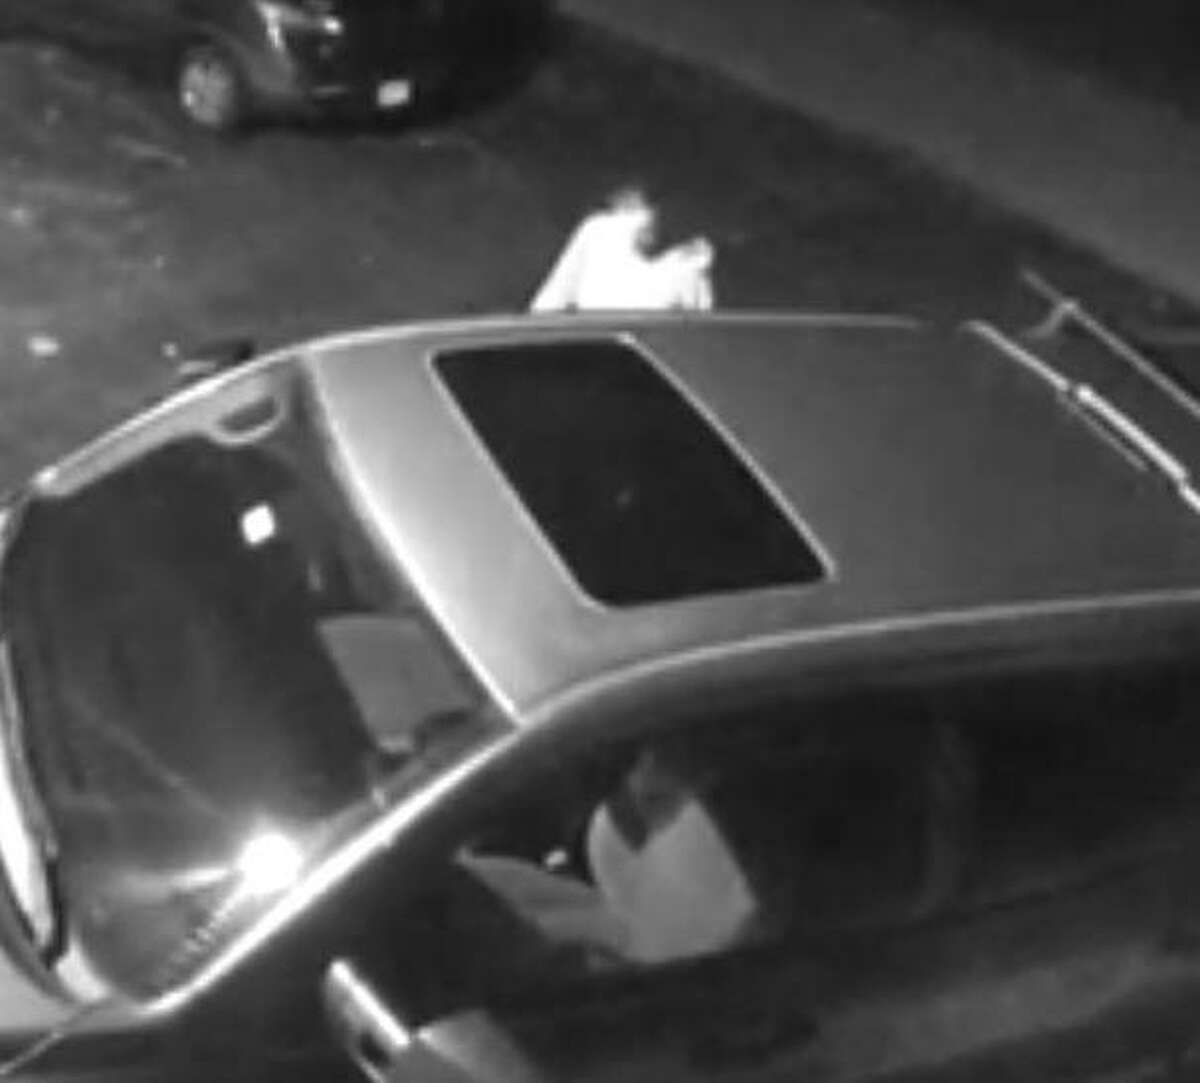 New Milford police are asking the public to help identify this individual caught on residential security cameras burglarizing vehicles in town last week.